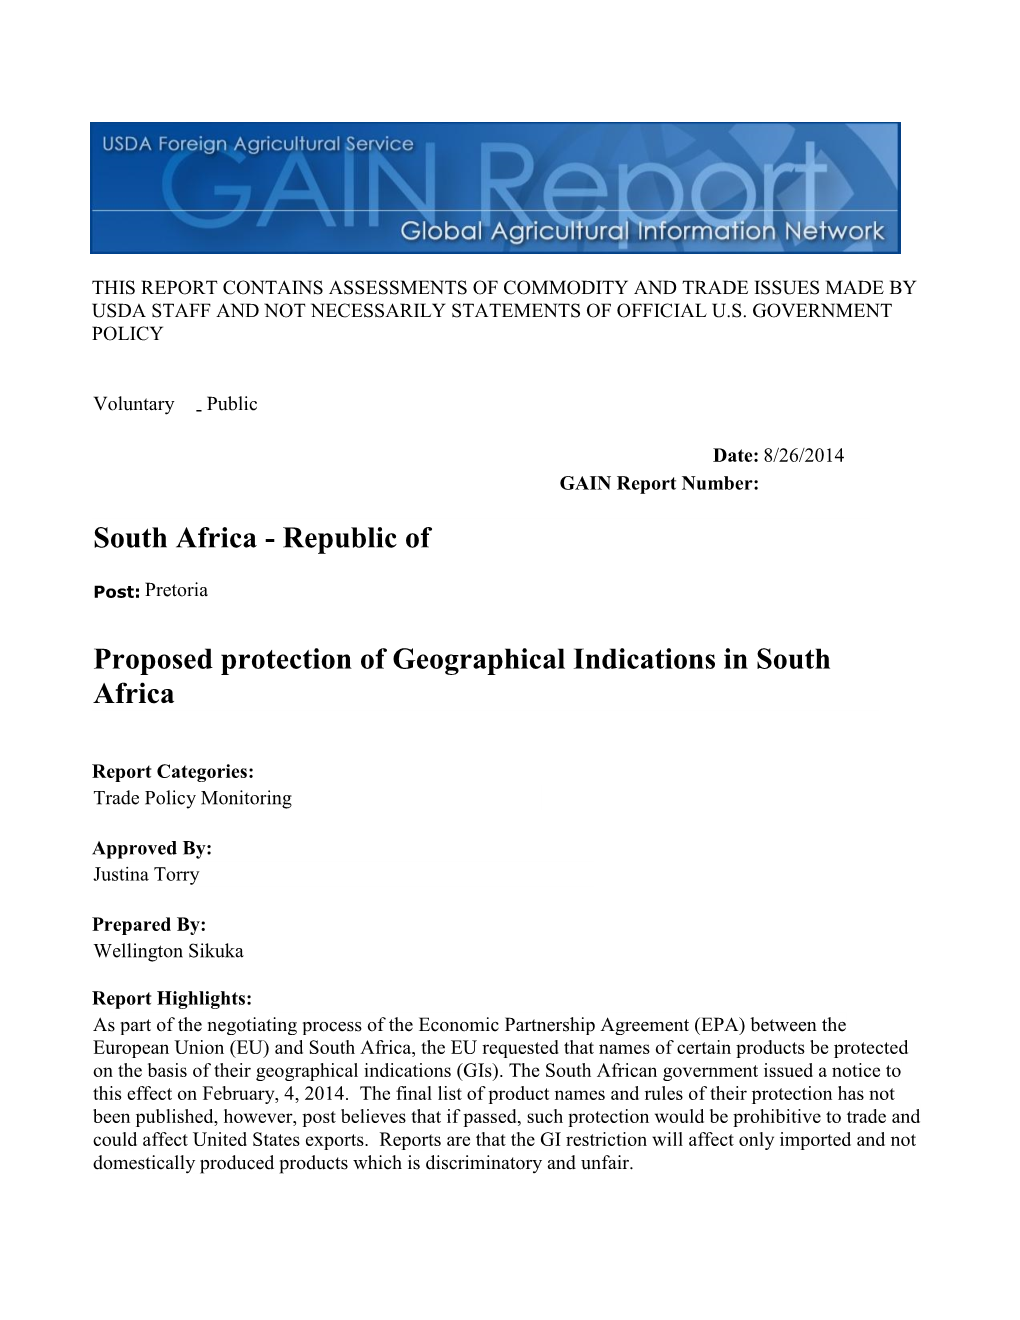 Proposed Protection of Geographical Indications in South Africa